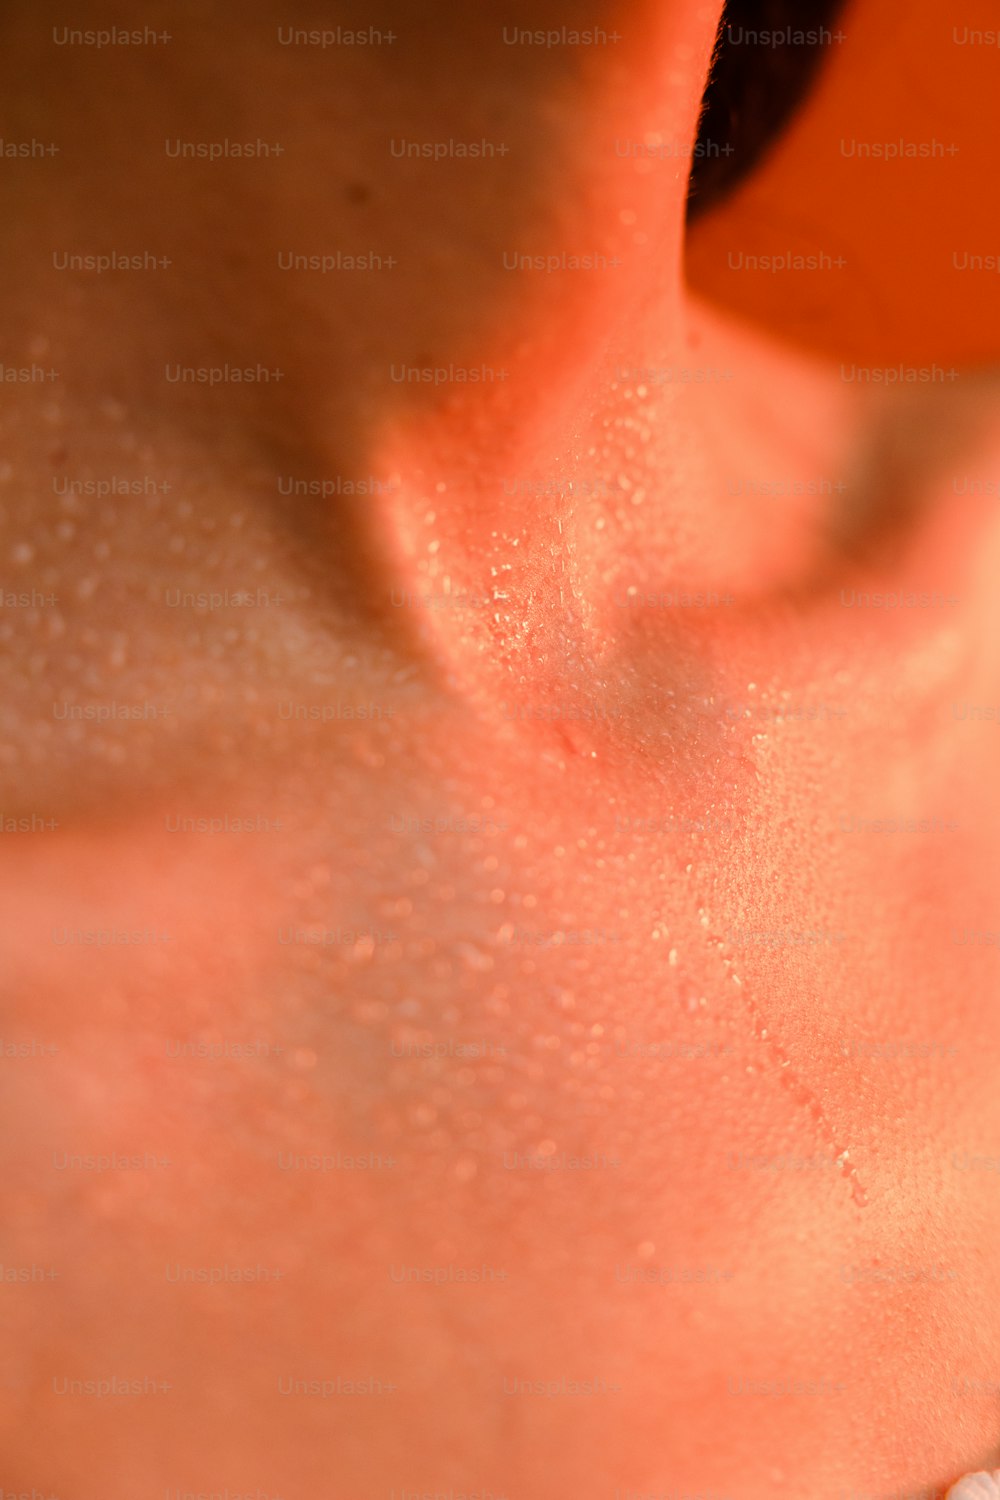 a close up of a person's neck and neck